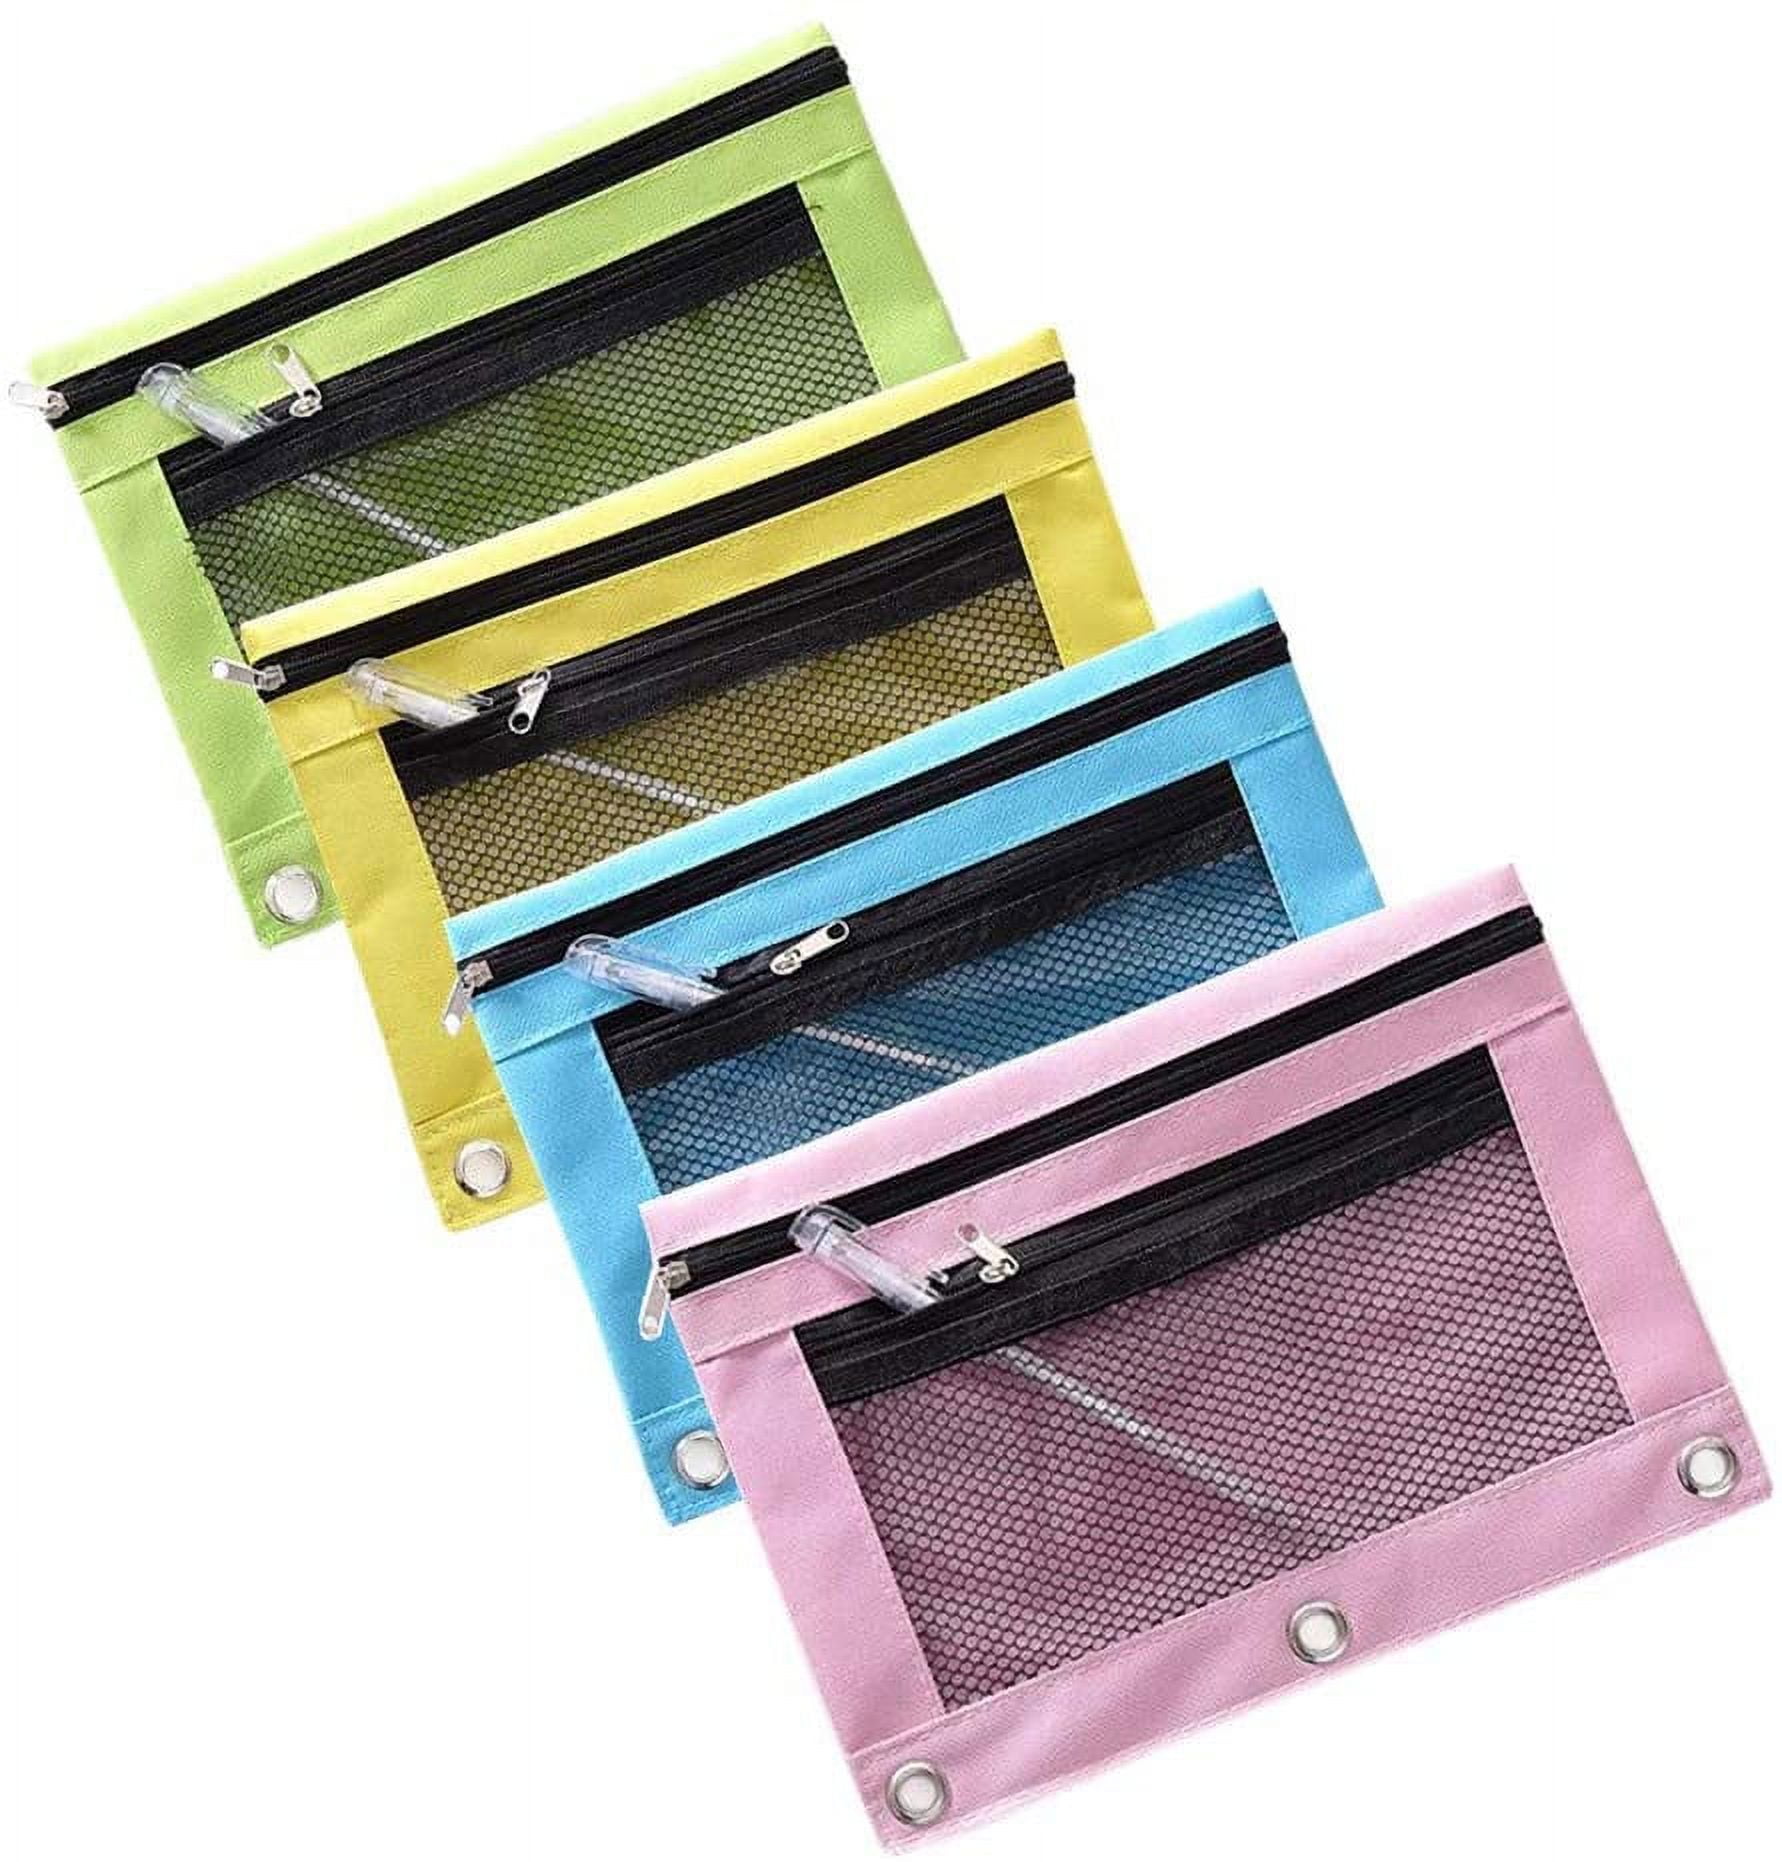 Pencil Pouch for 3 Ring Binder, 36 Piece Bulk 3 Holes Zipper Pencil Pouches  in 6 Assorted Colors, Clear Durable Pencil Case for School, Classroom